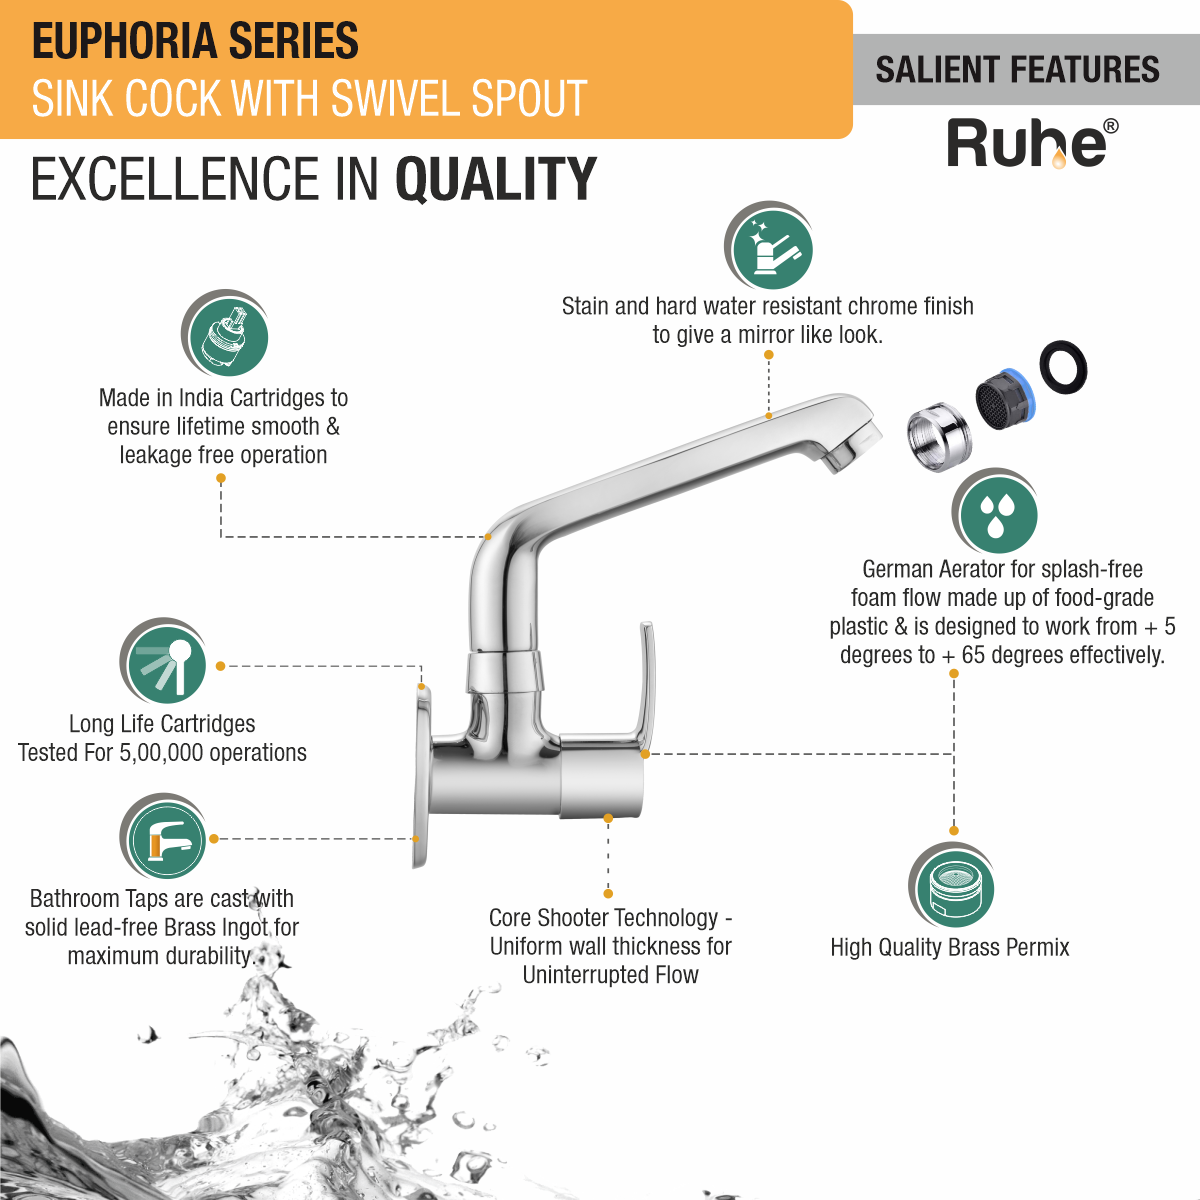 Euphoria Sink Tap With Swivel Spout Faucet features